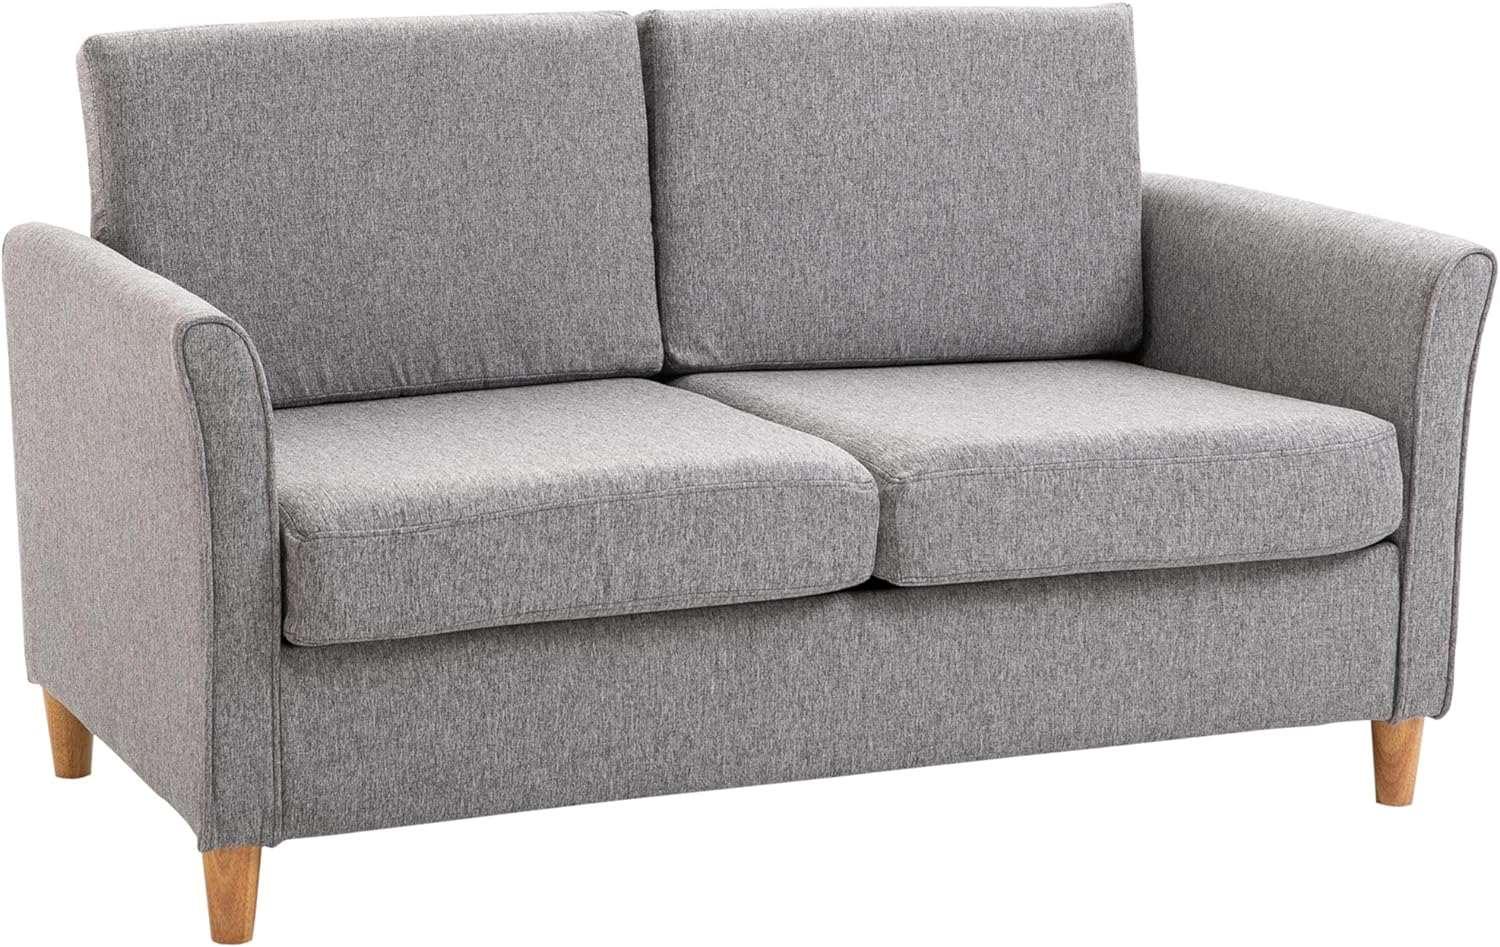 Ultimate Comfort 2-Seater Loveseat Sofa with Wooden Legs, Light Grey - Furniture4Design